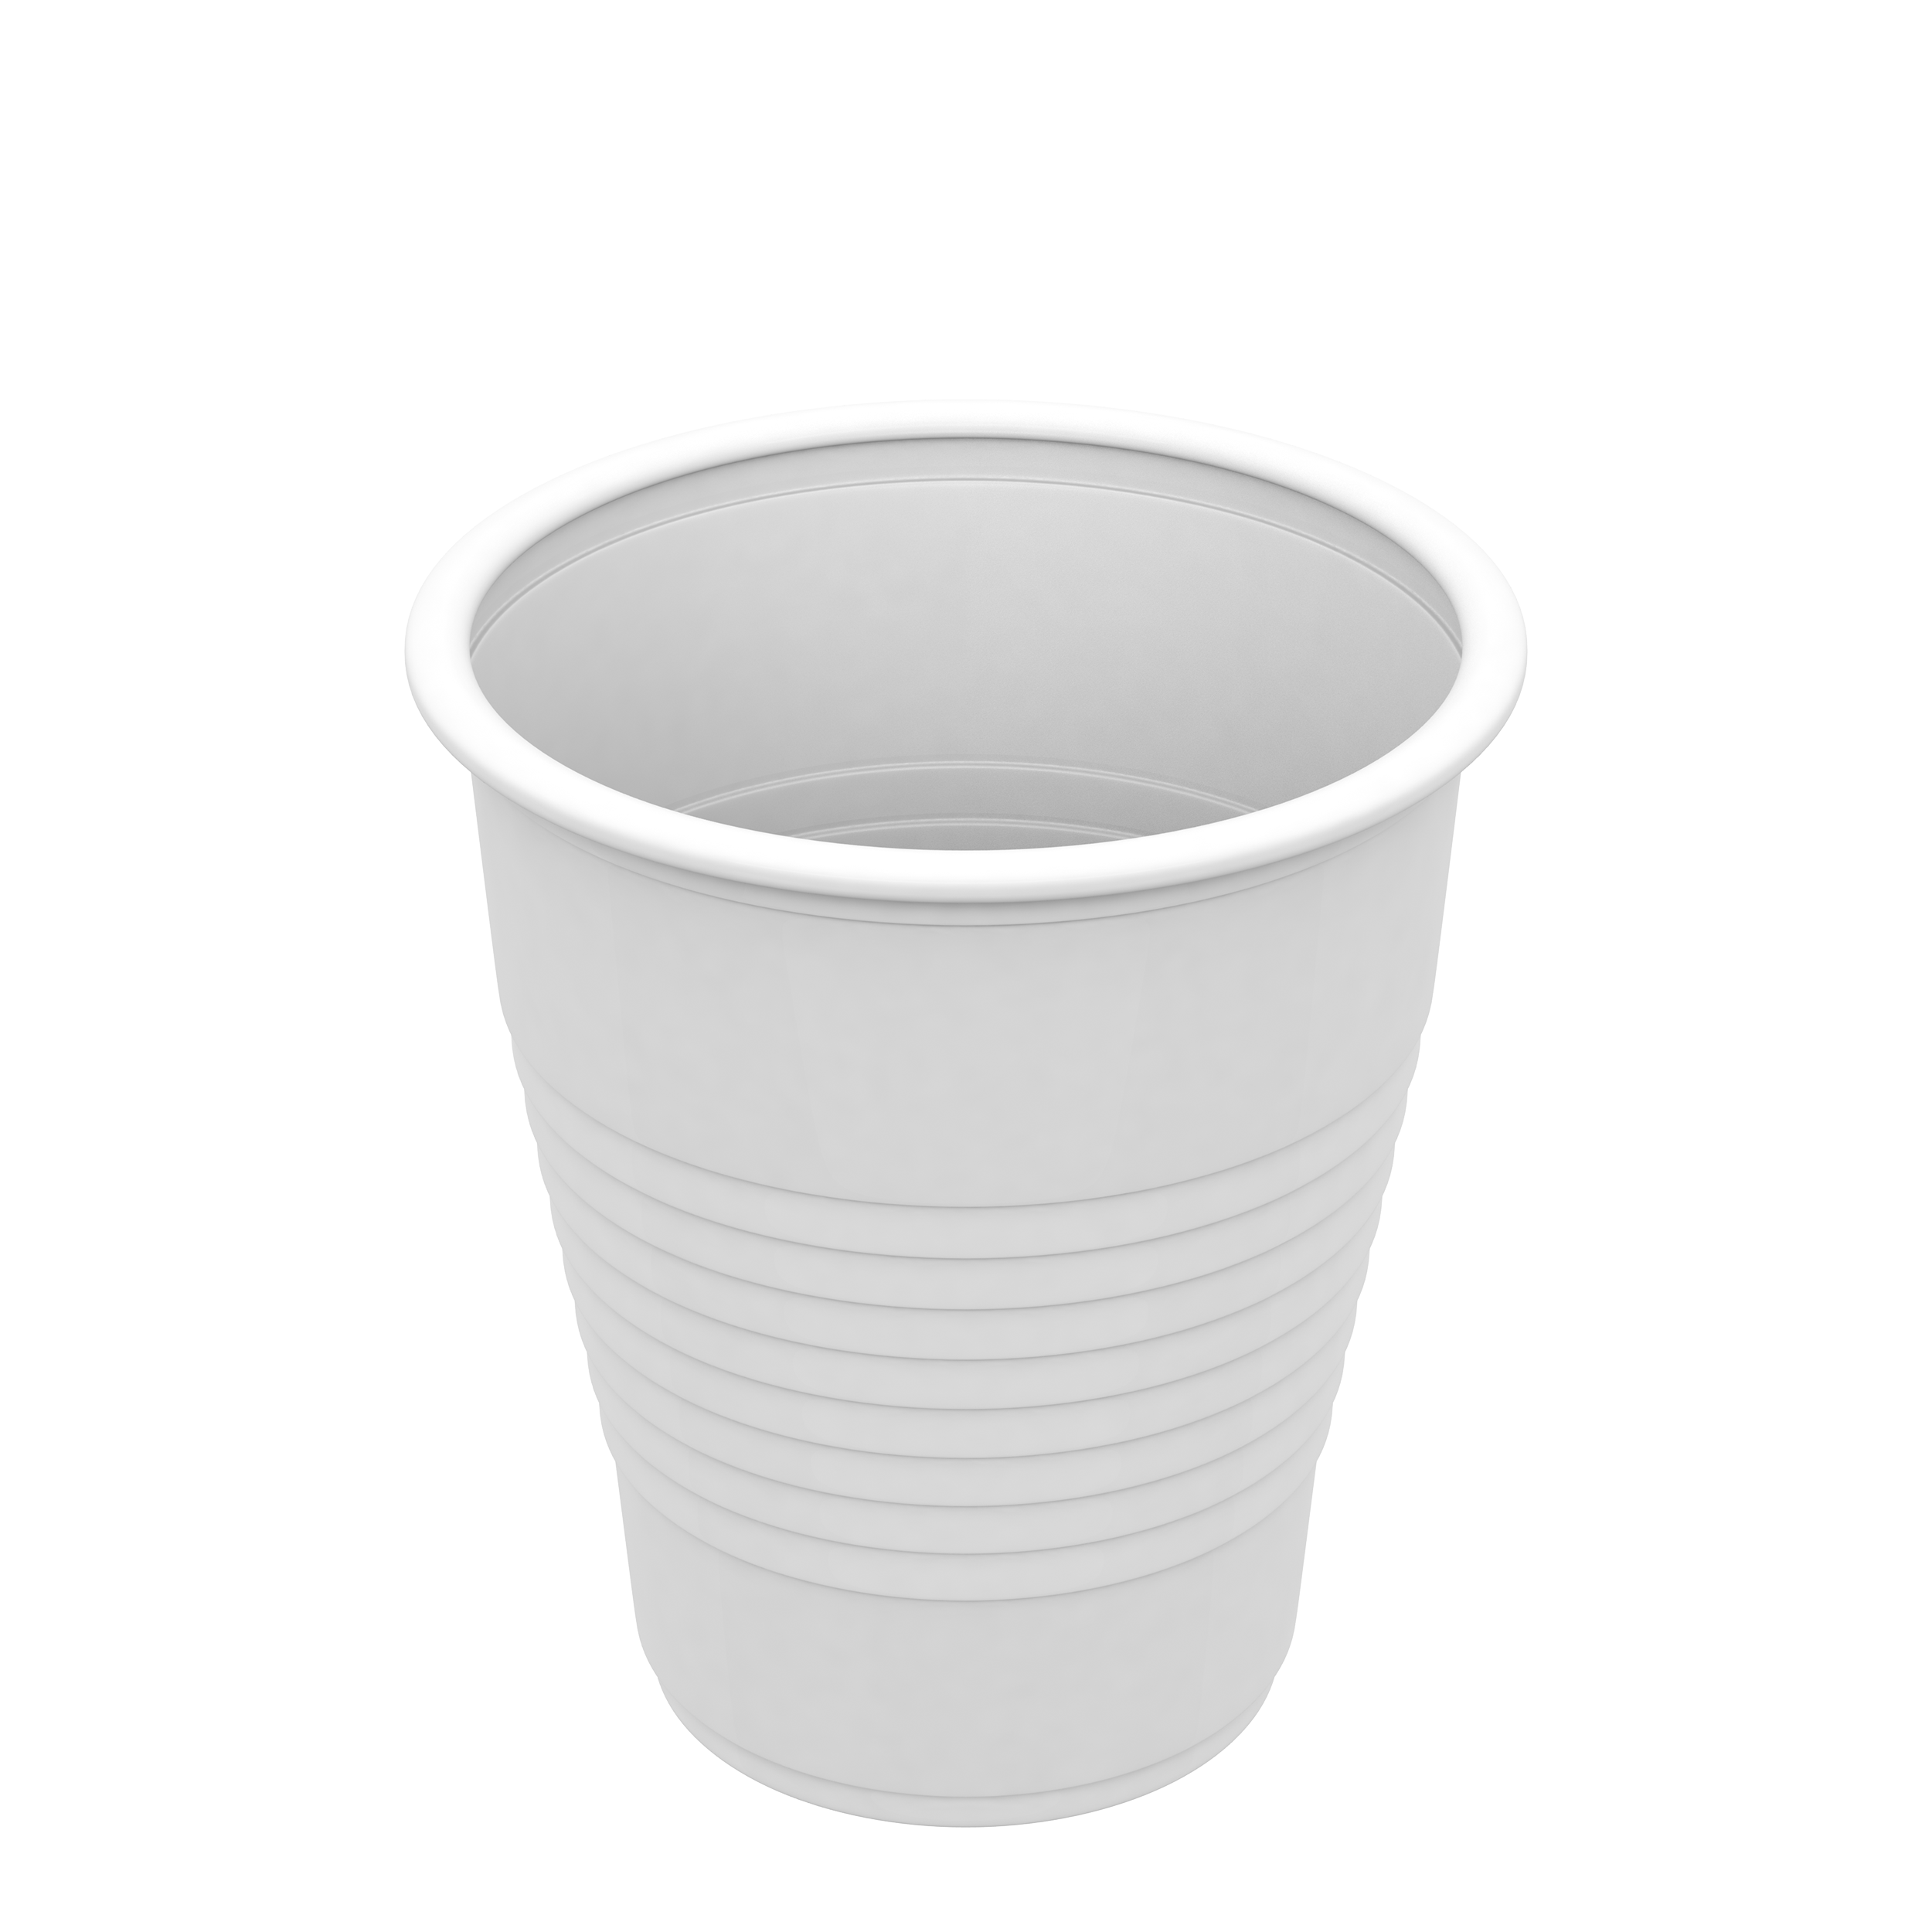 Drinking Cups - 5 oz. White